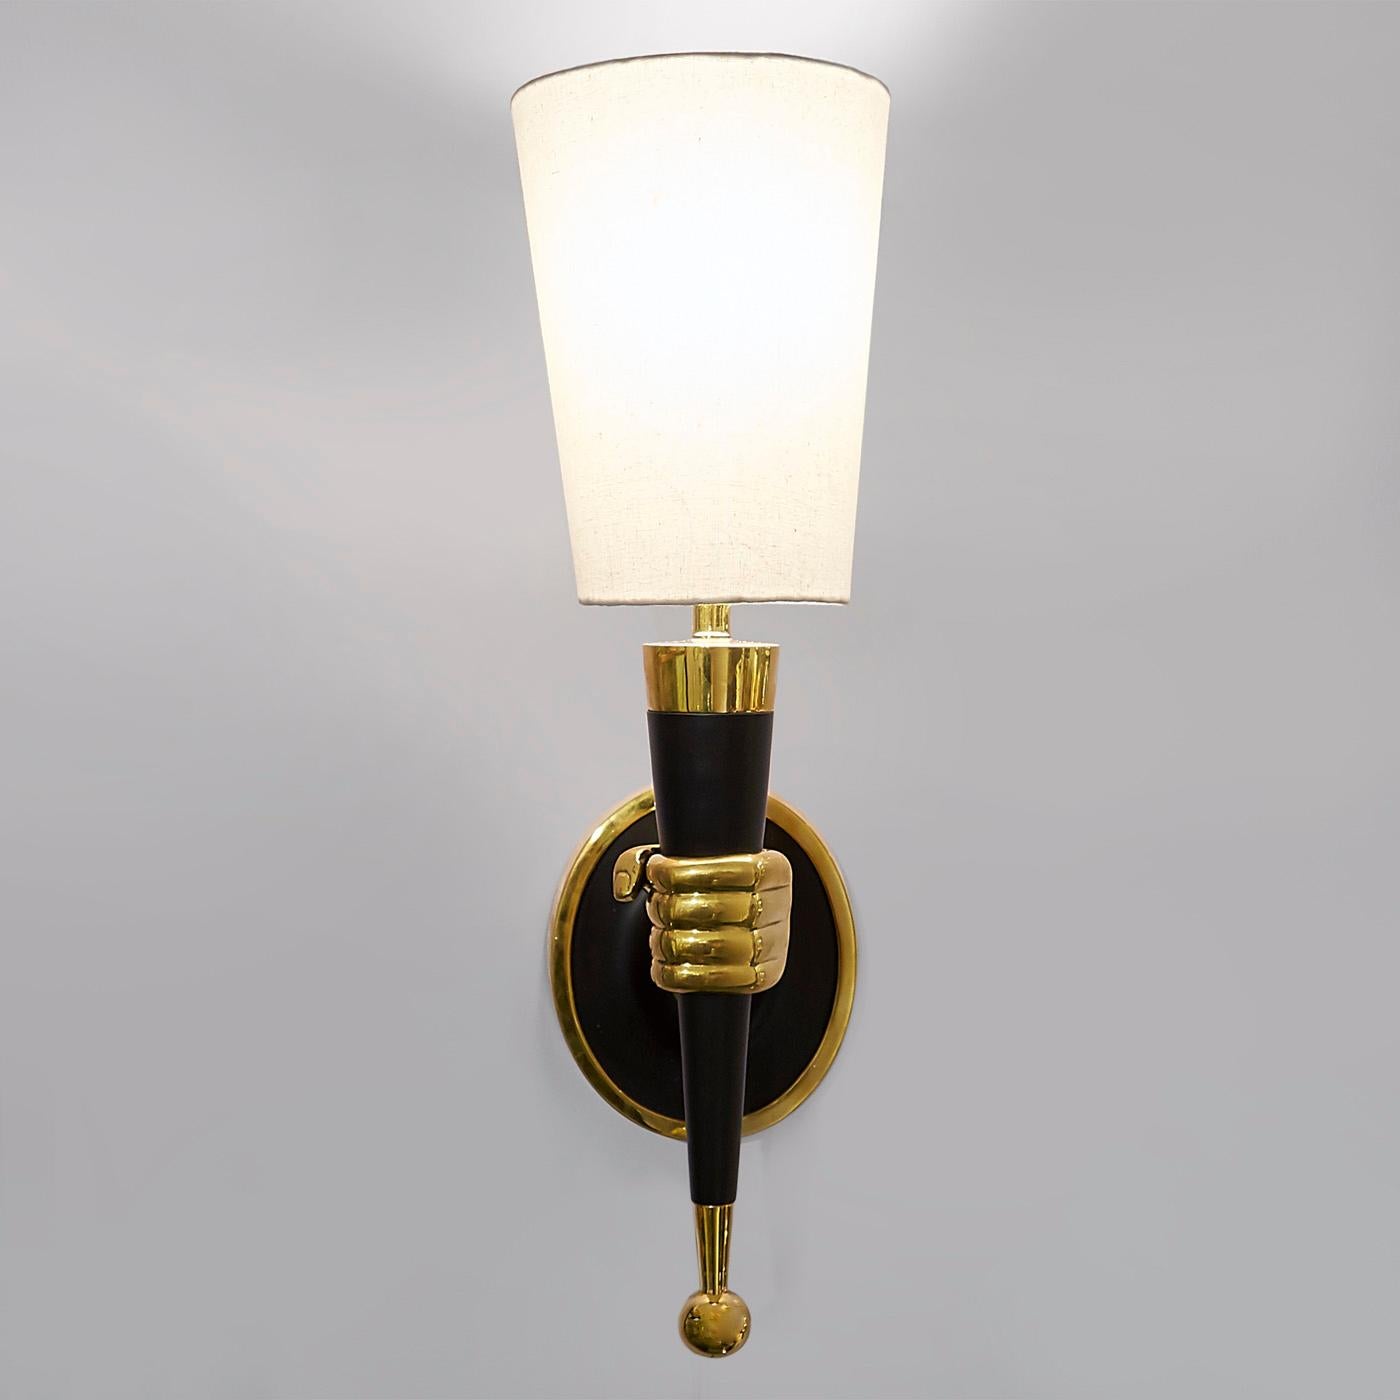 Surrender to the surreal. Available in left or right hands, each sconce is sand cast in brass with blackened accents. The inverted shade completes the torch-like effect. Fab in a dining room or ultra-intriguing in a foyer. The original brass hand